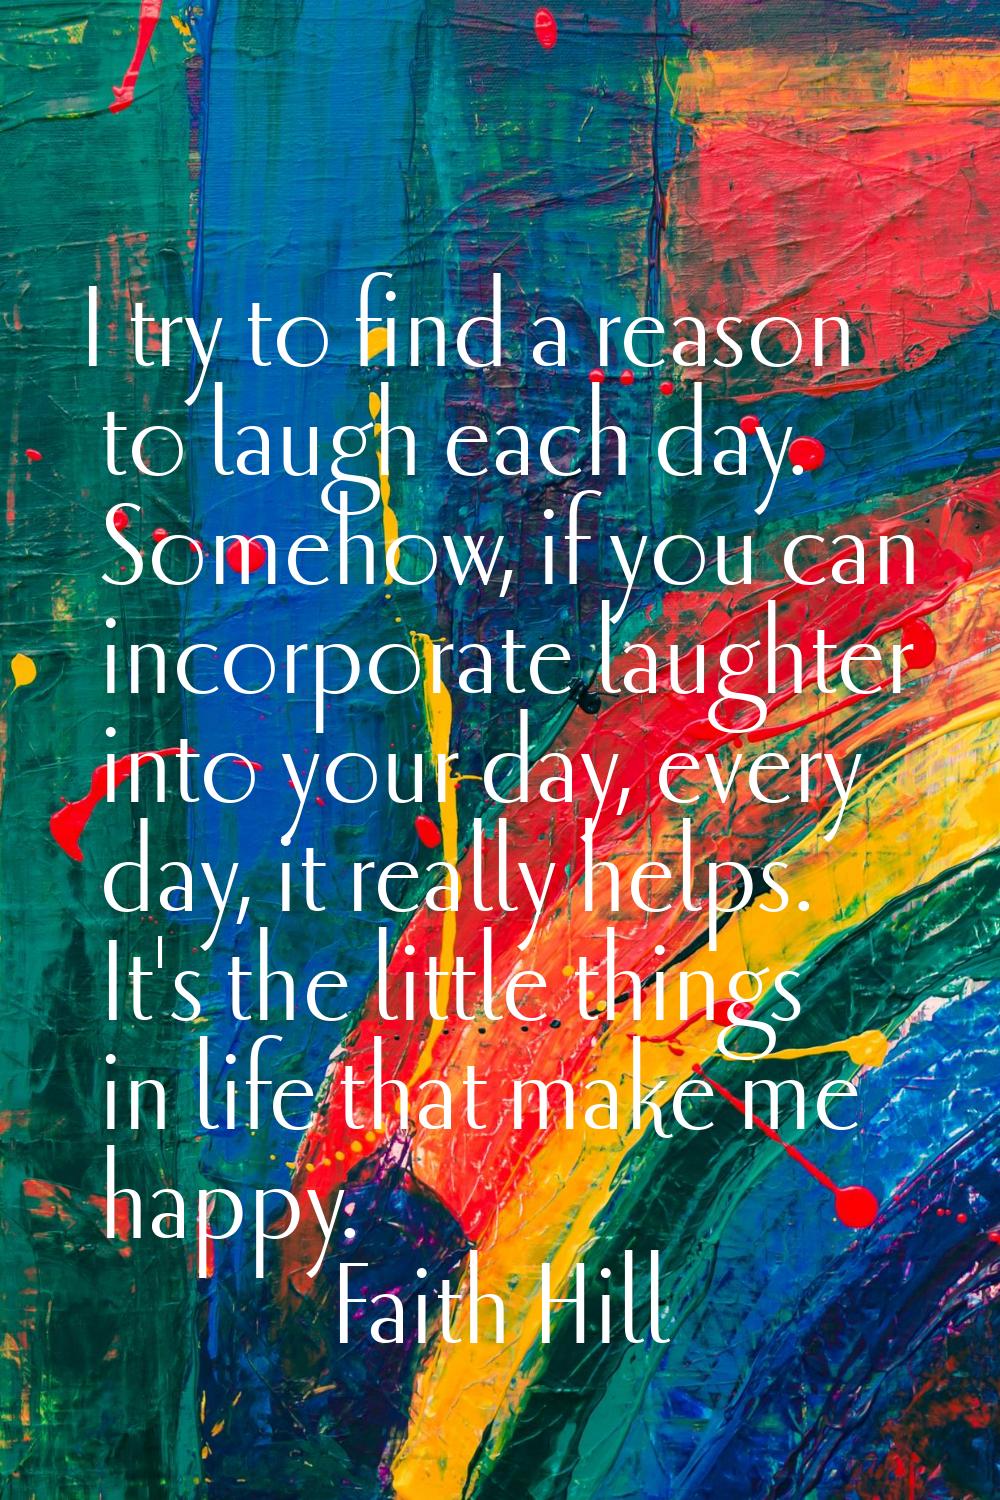 I try to find a reason to laugh each day. Somehow, if you can incorporate laughter into your day, e